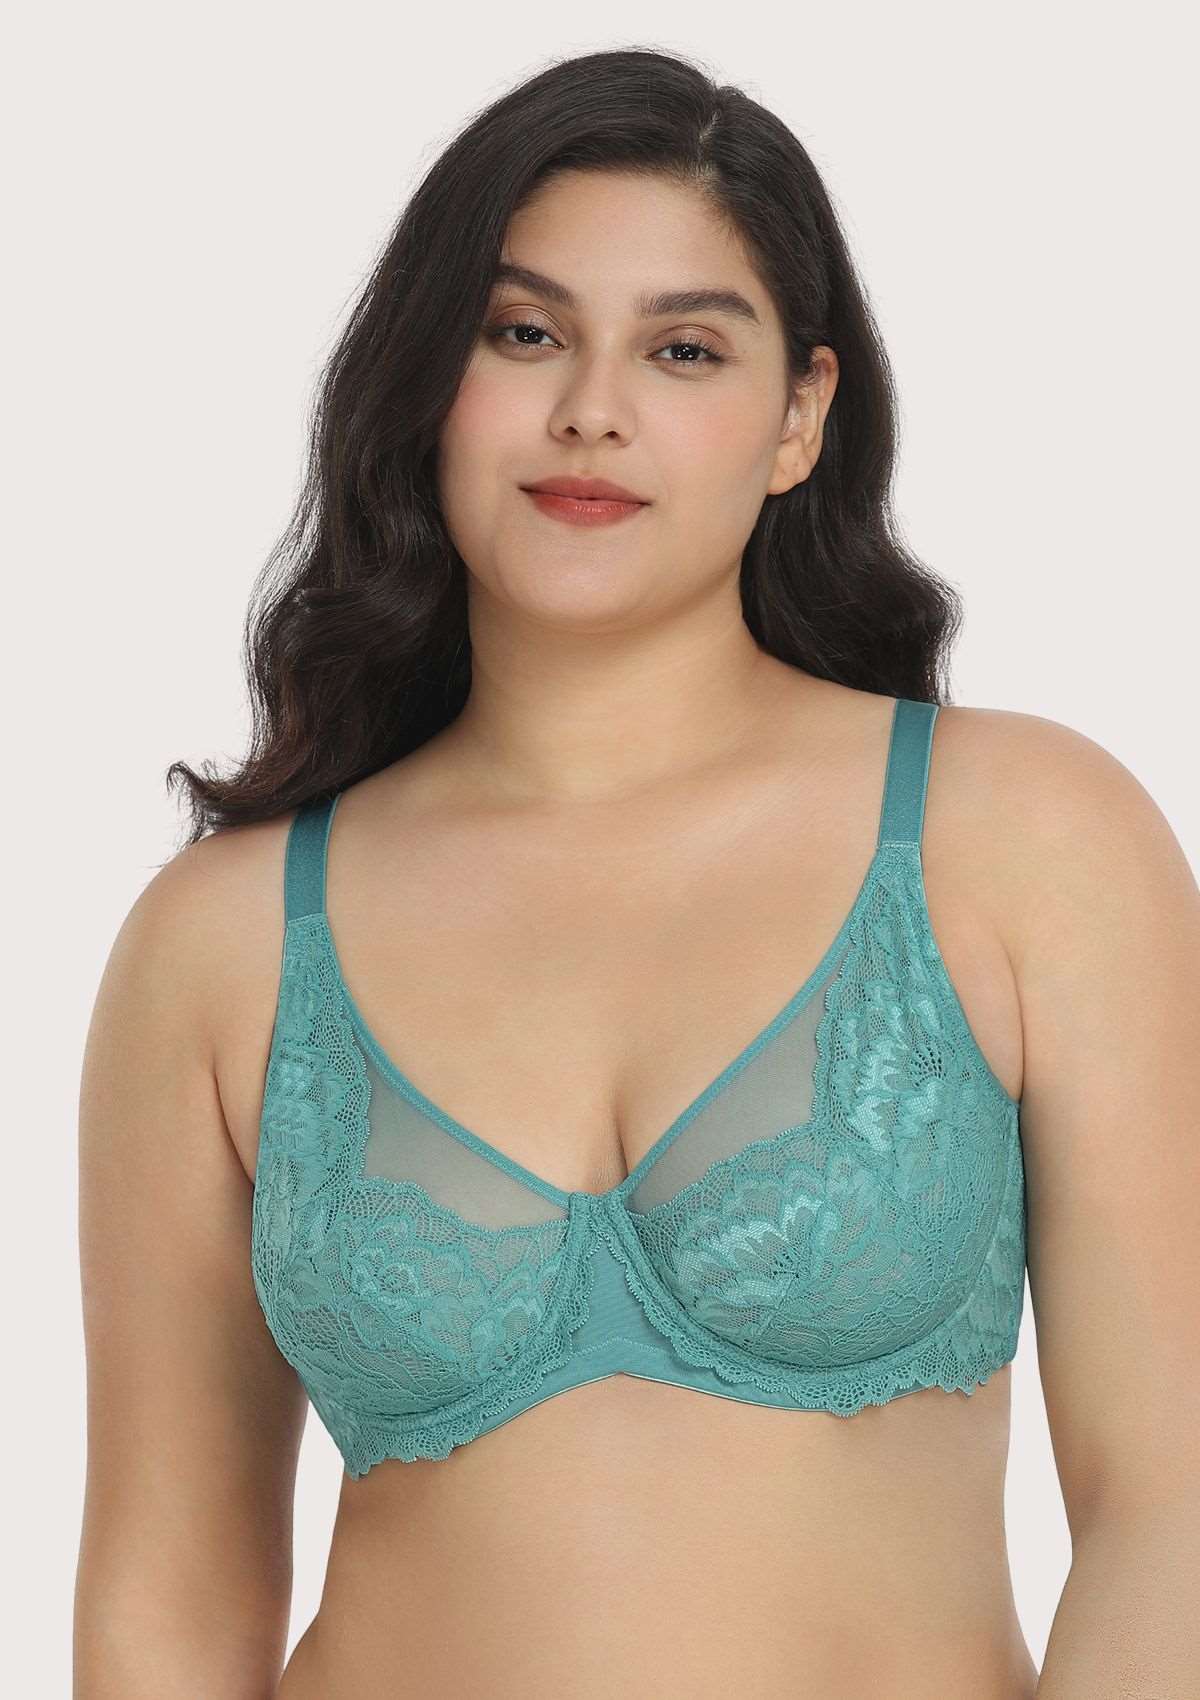 HSIA Paeonia Lace Full Coverage Underwire Non-Padded Uplifting Bra - Teal / 40 / D